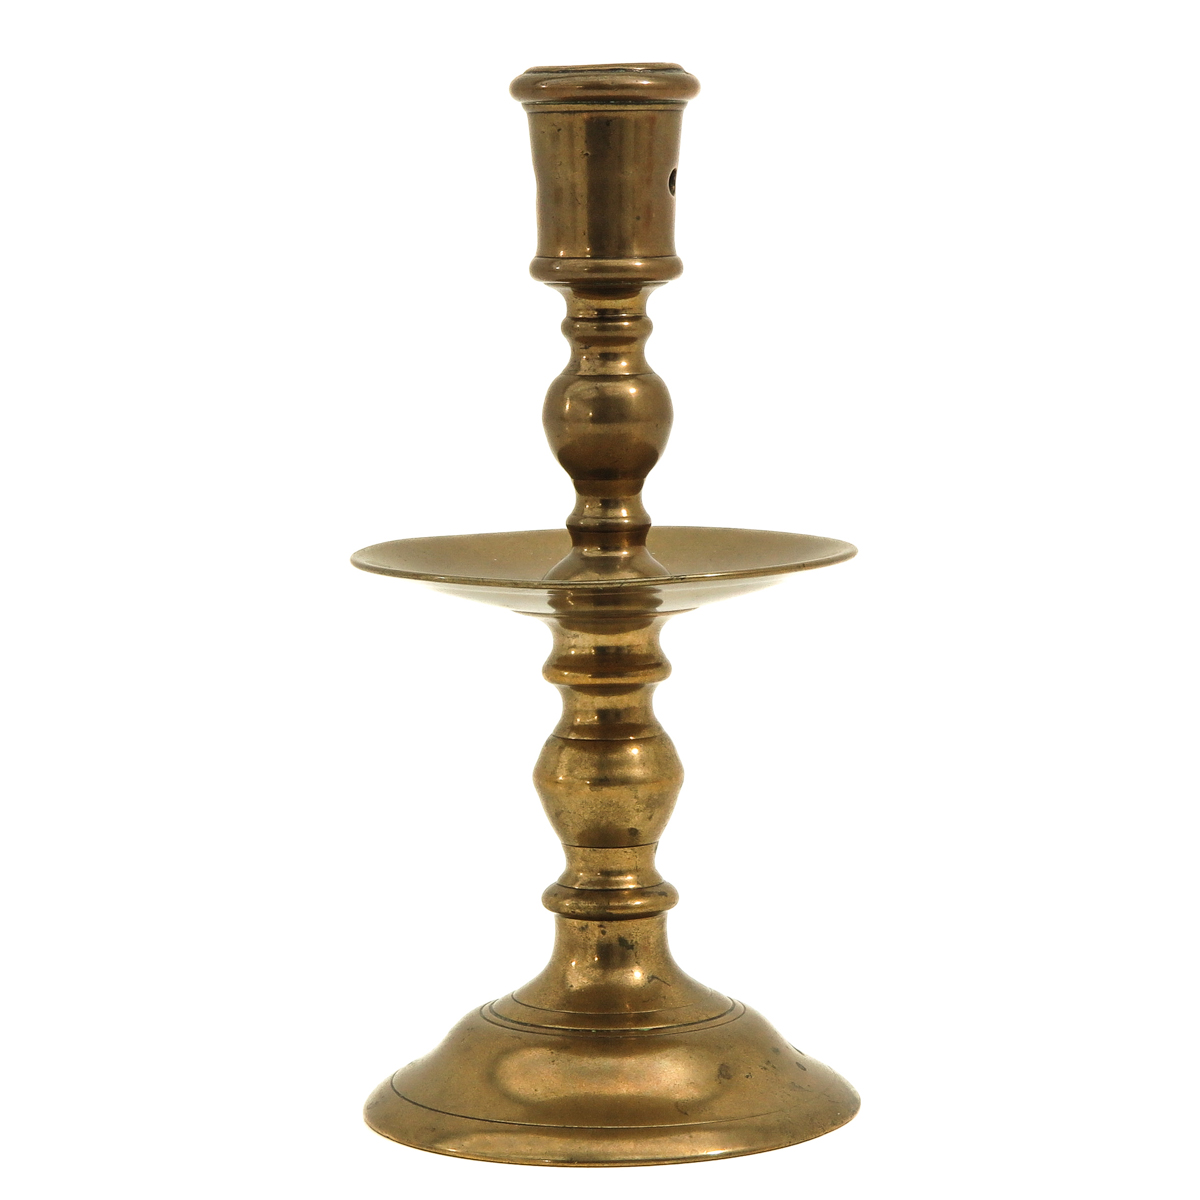 A 17th Century Dutch Candlestick - Image 4 of 8